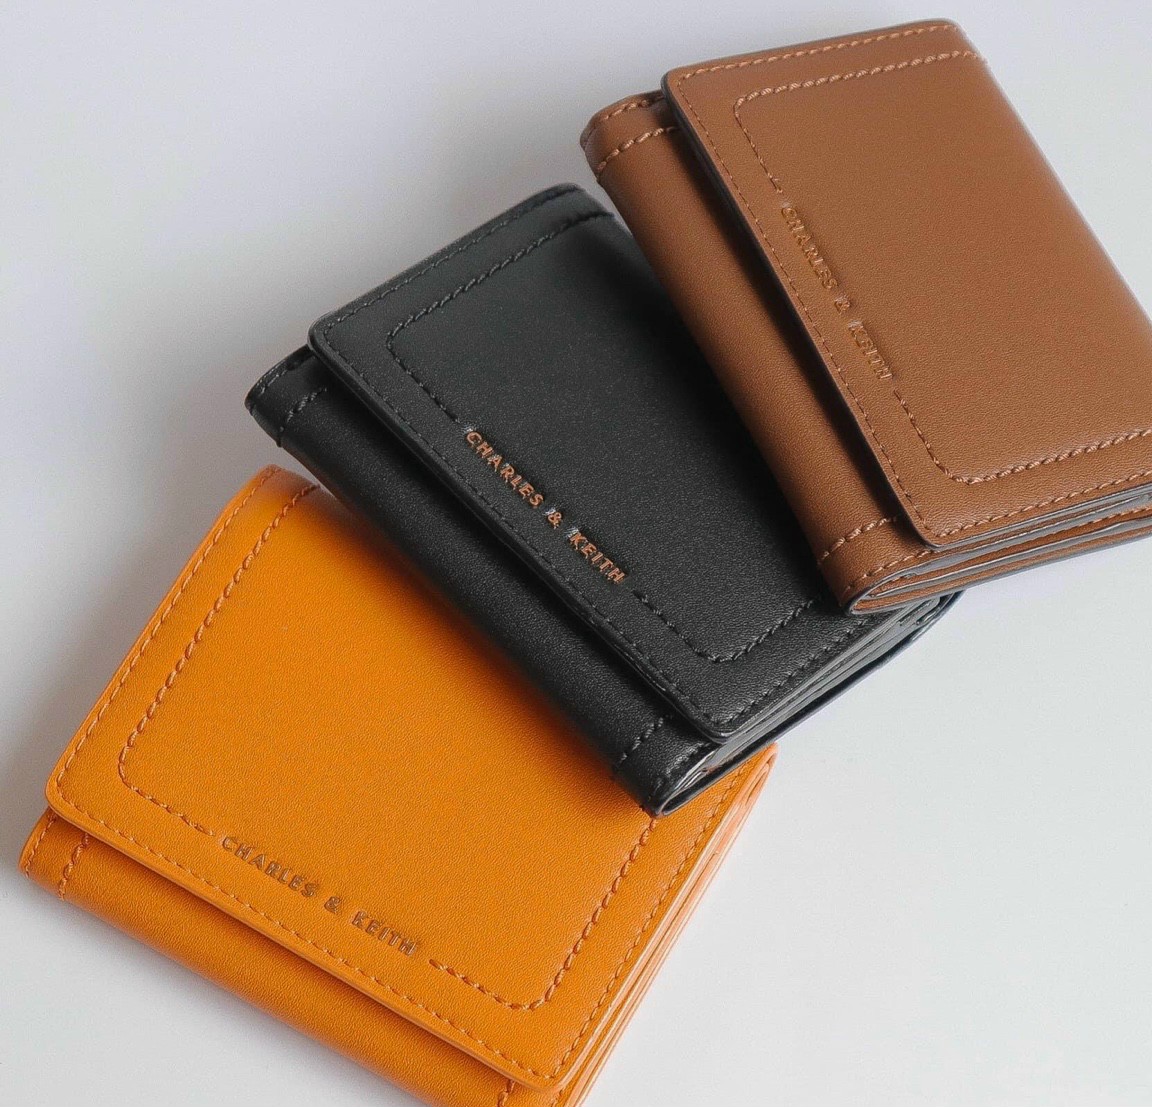 VÍ CHARLES KEITH SONNET SNAP BUTTON SMALL WALLET 11